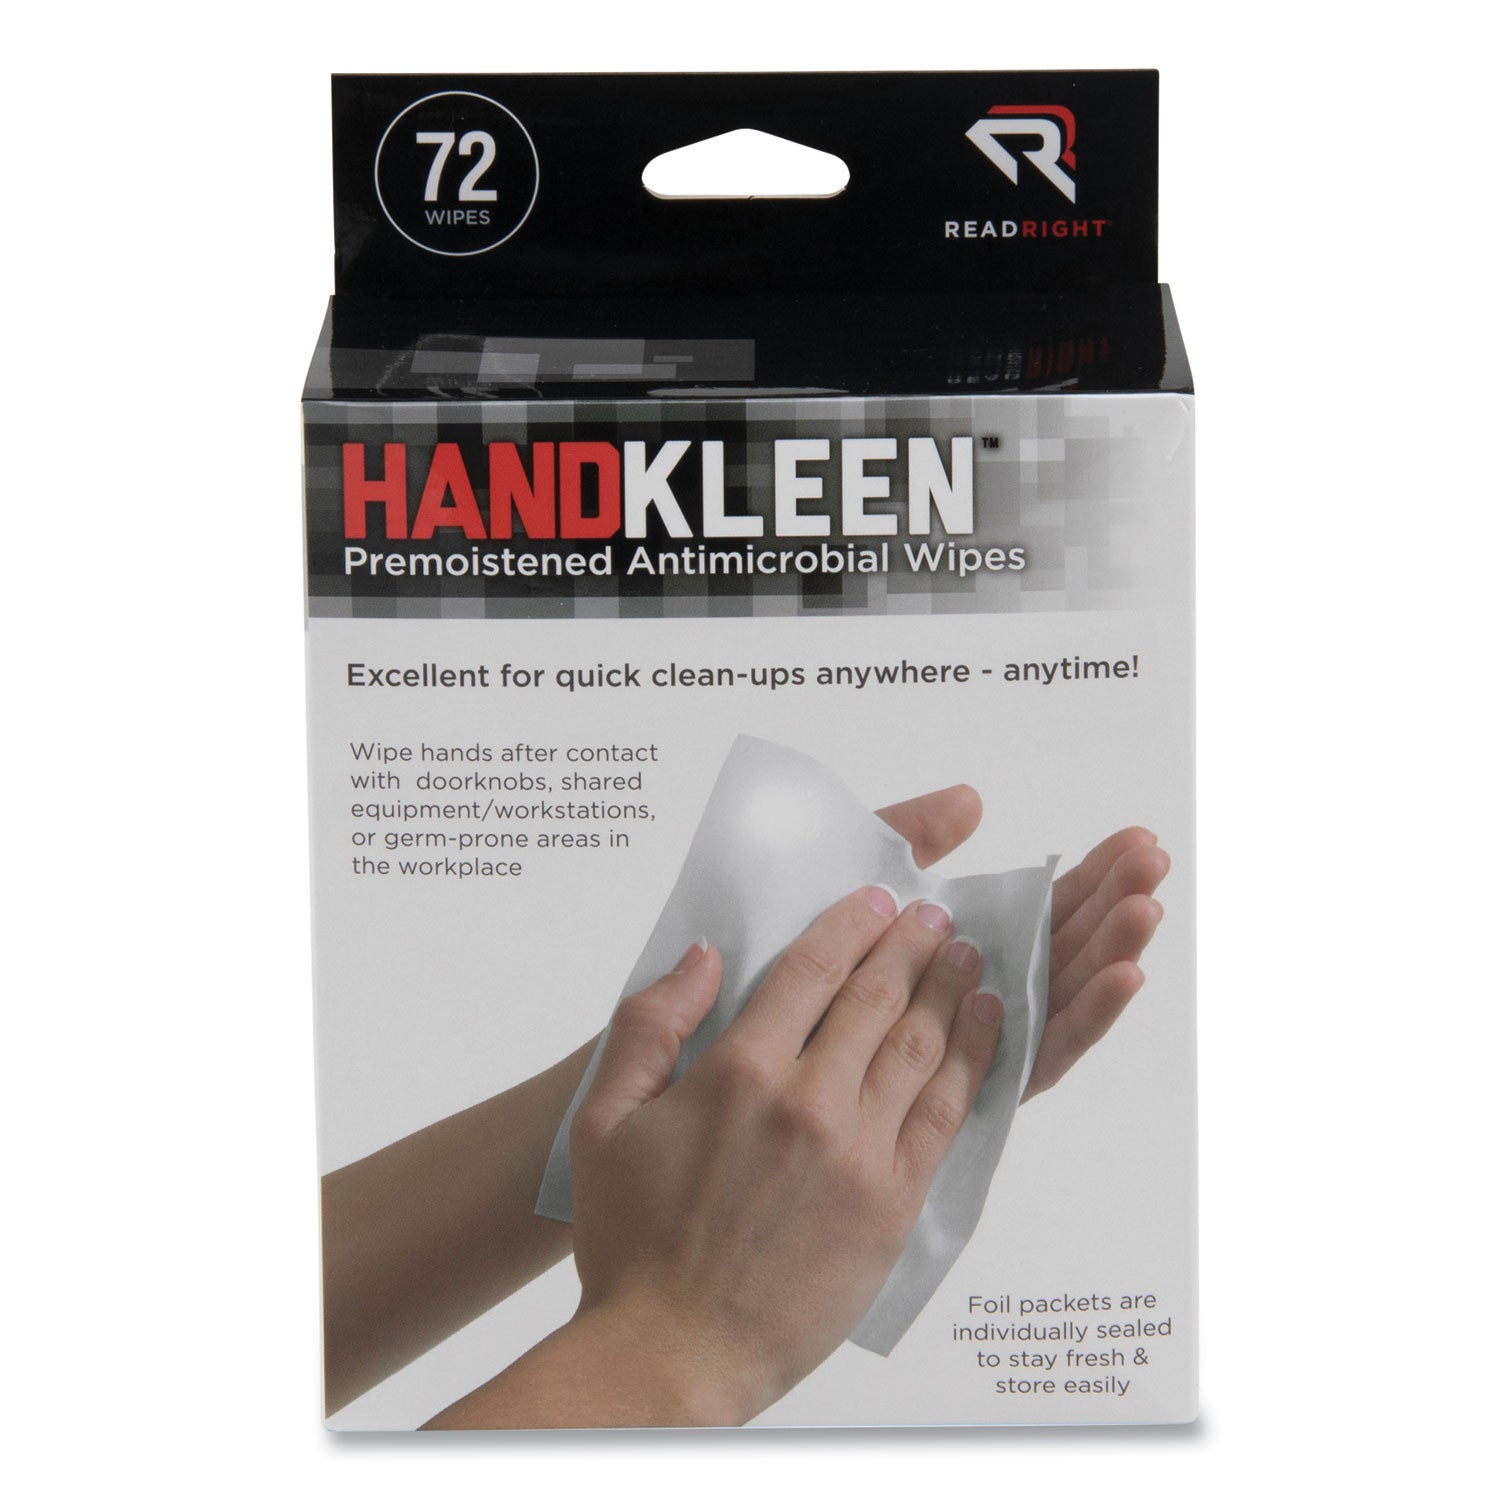 handkleen-premoistened-antibacterial-wipes-7-x-5-foil-packet-unscented-white-72-box_rearr15112 - 1